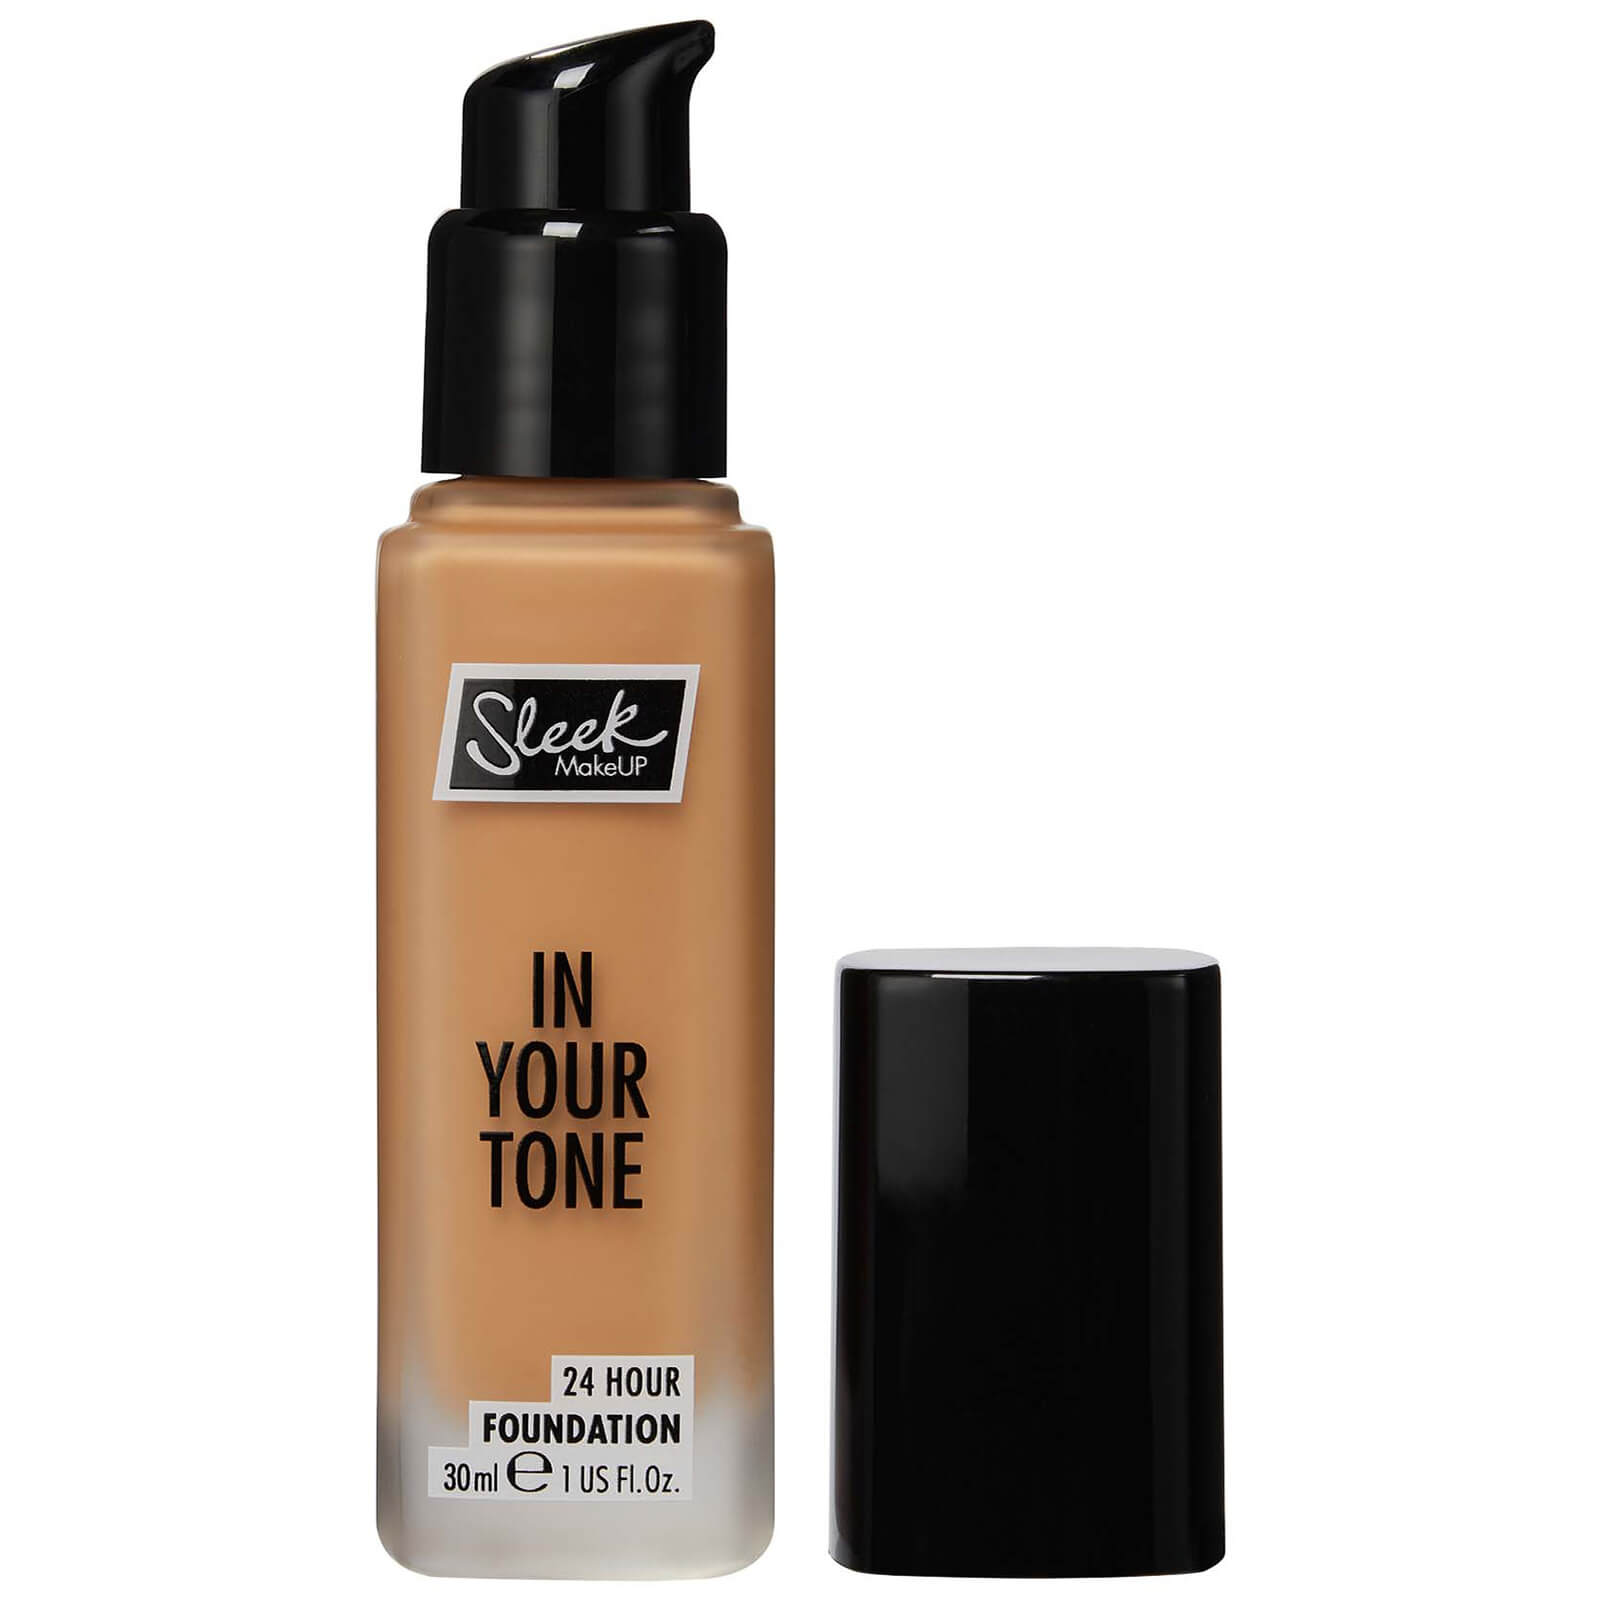 Sleek MakeUP in Your Tone 24 Hour Foundation 30ml (Various Shades) - 5W